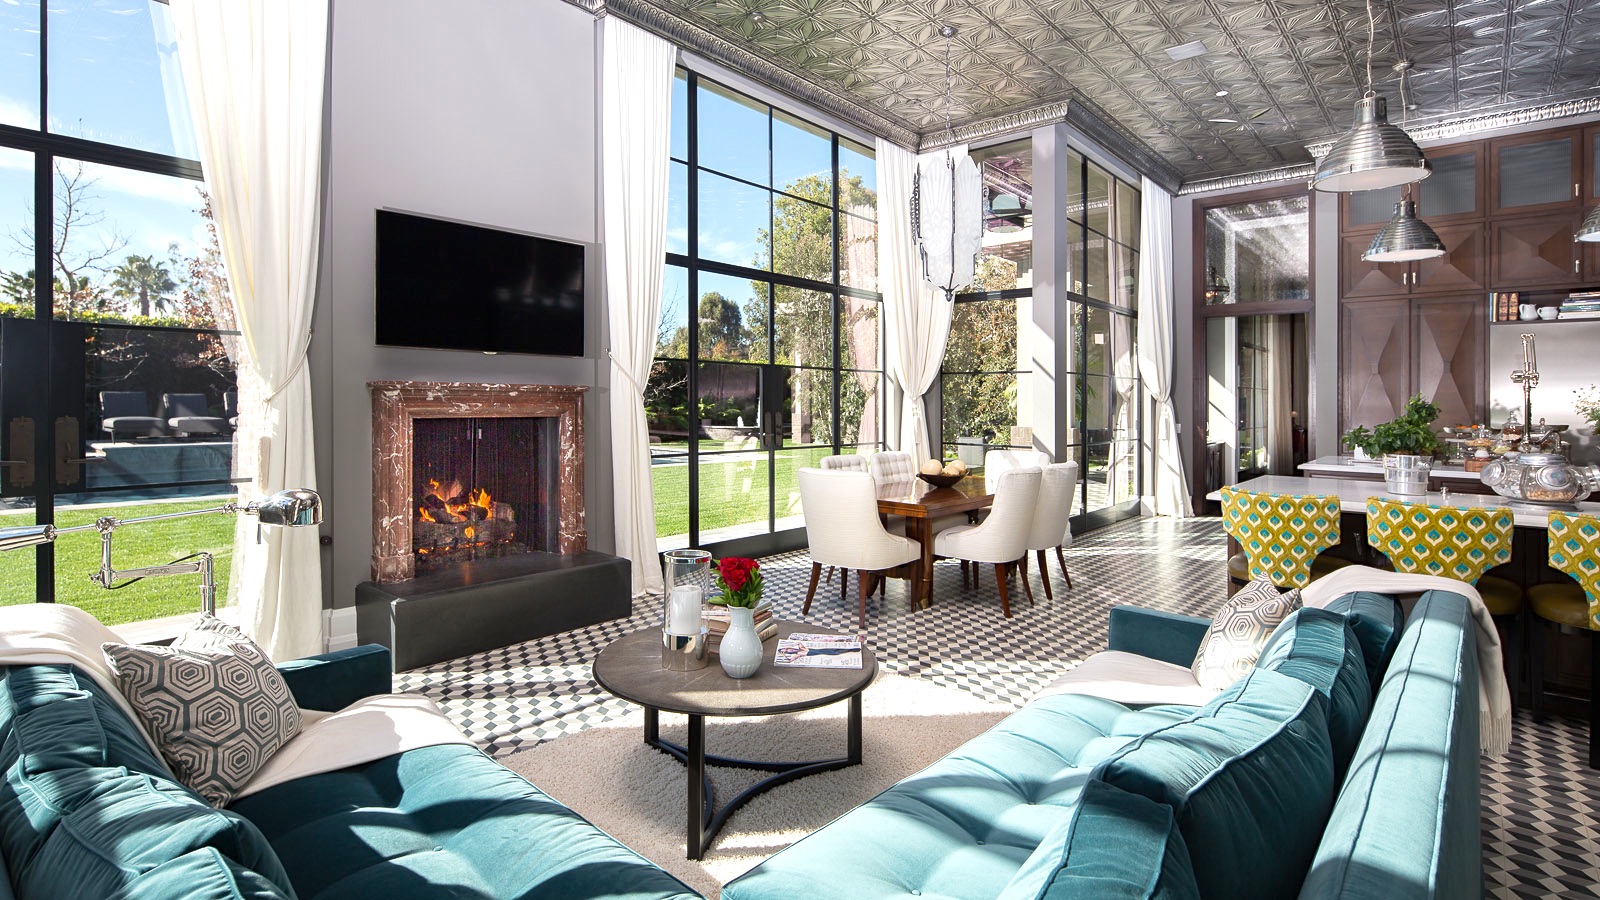 A living room incorporating the basics of interior design, including large windows and a fireplace.